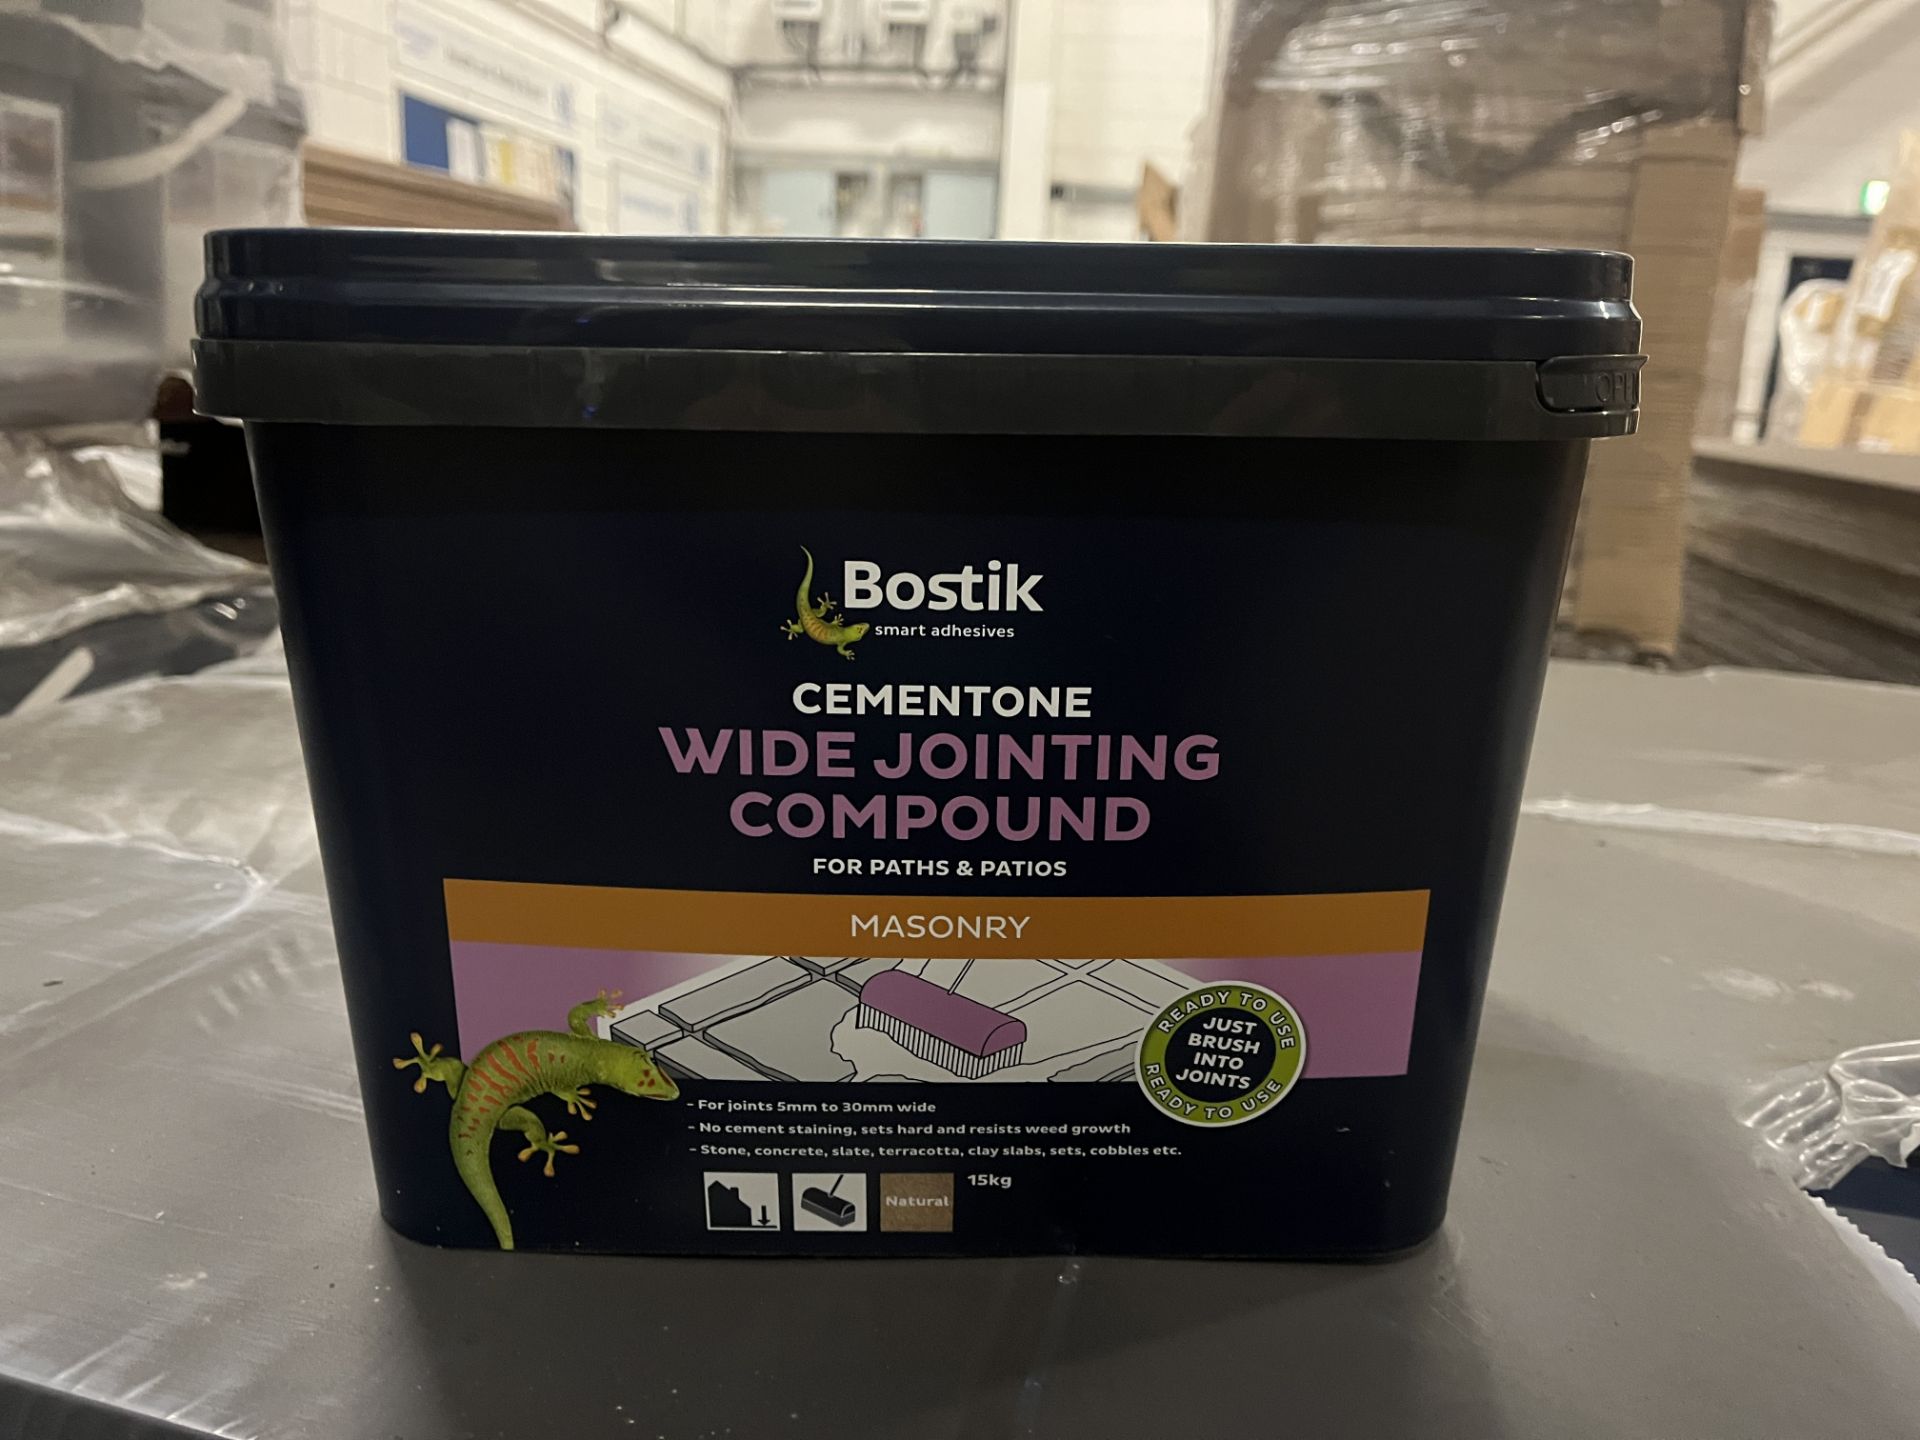 PALLET TO CONTAIN 64 X BRAND NEW BOSTIK 15KG CEMETONE WIDE JOINTING COMPOUND FOR PATHS AND PATIOS